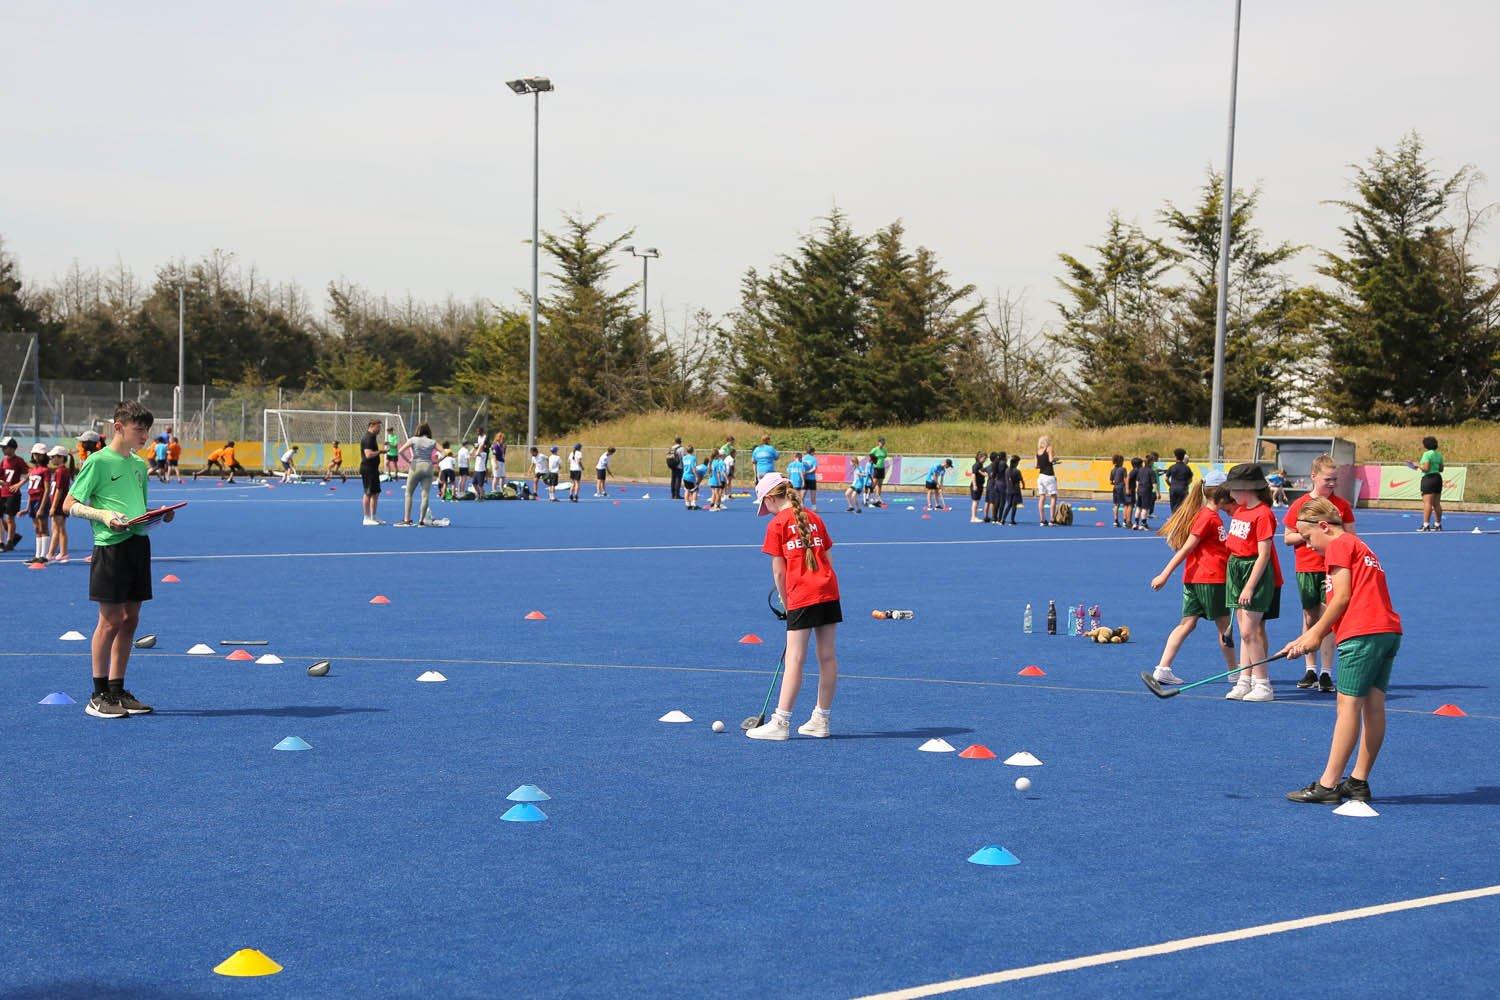 A group of children playing hockey on a blue field.